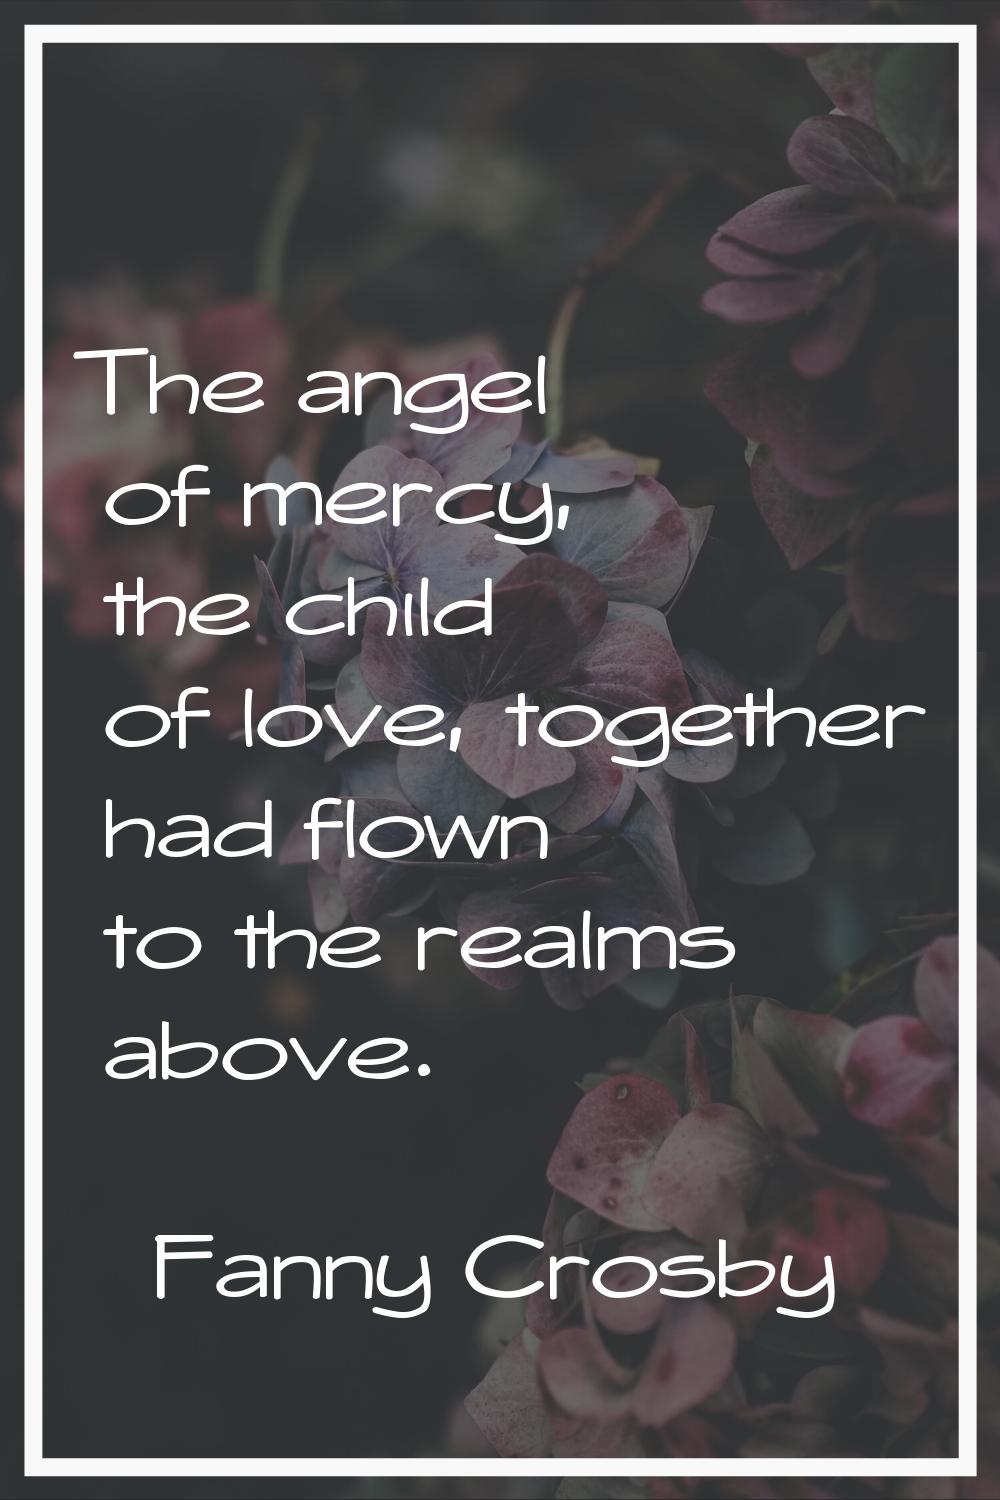 The angel of mercy, the child of love, together had flown to the realms above.